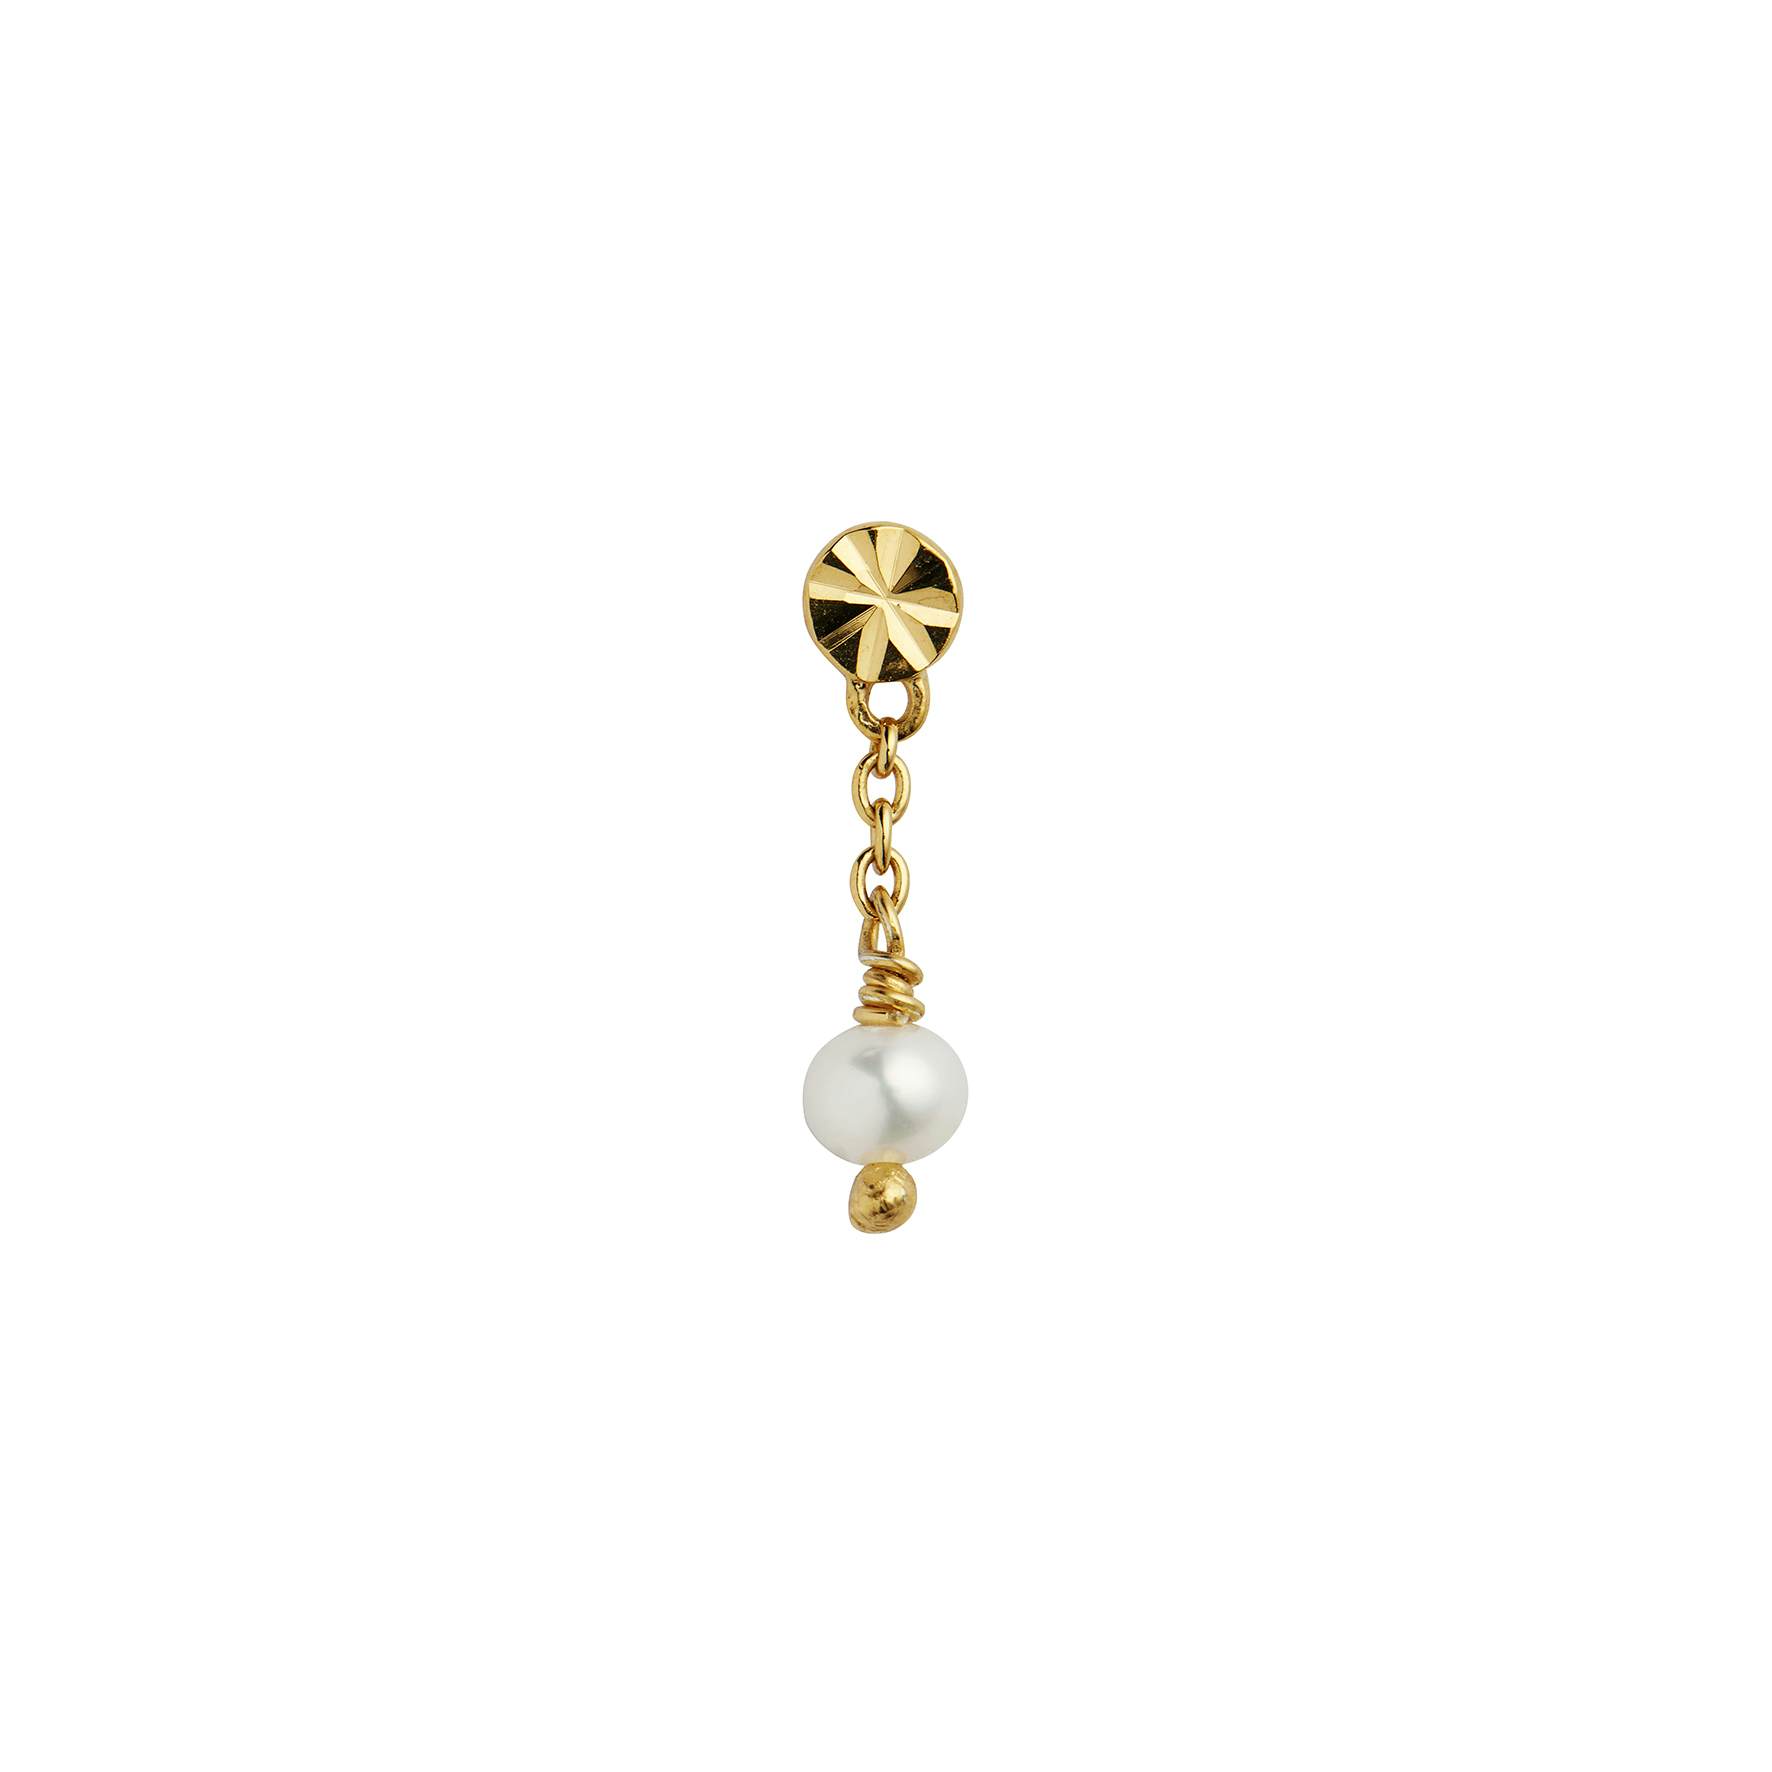 Tres Petit Etoile Earring With Pearl from STINE A Jewelry in Goldplated-Silver Sterling 925